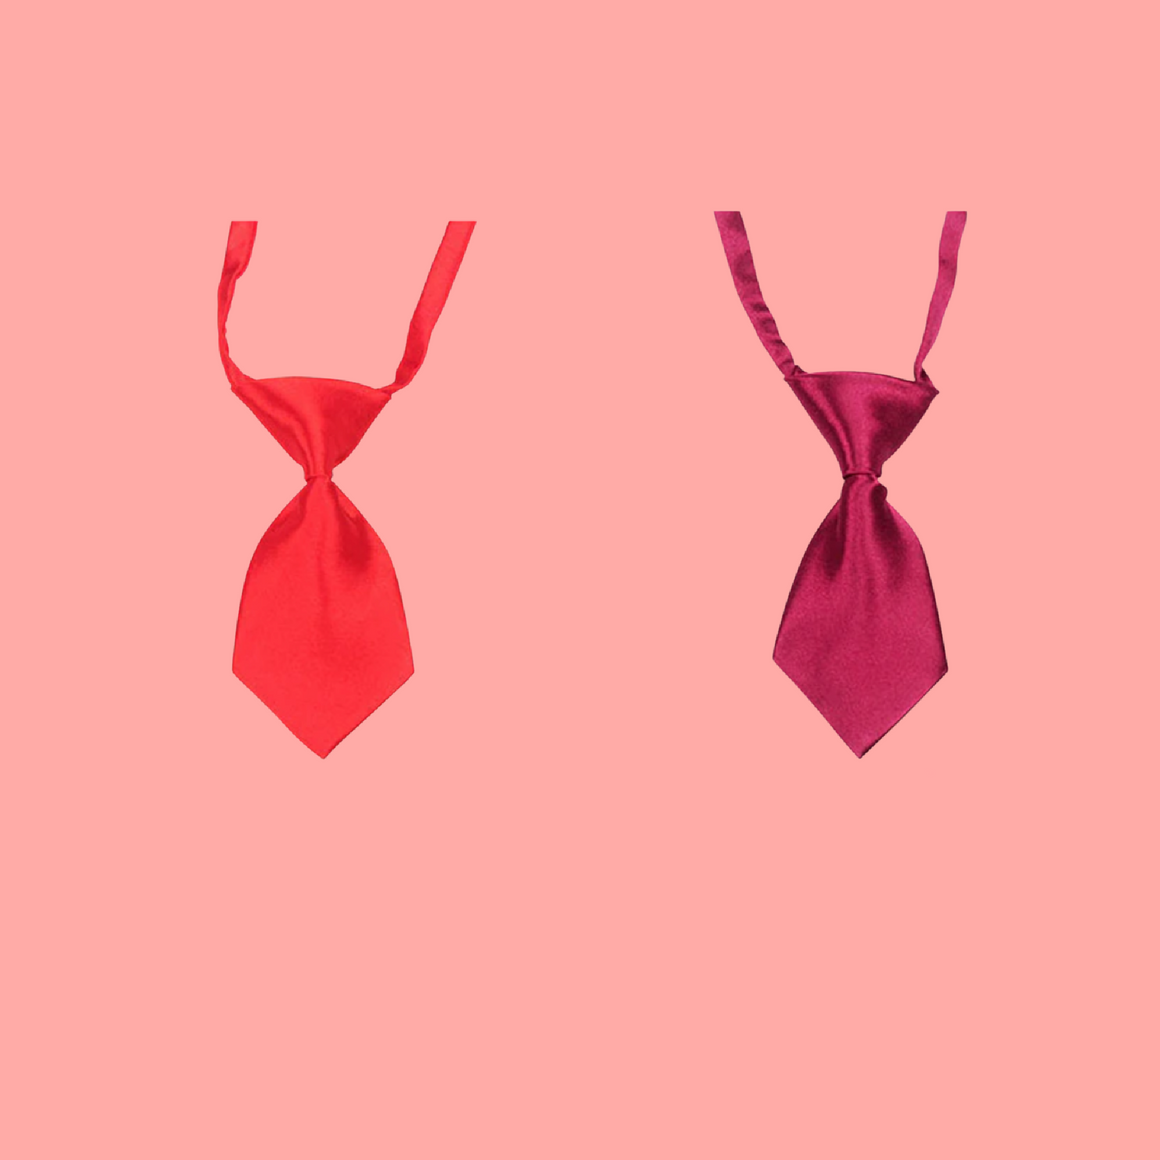 Small Red Pet Neck Ties